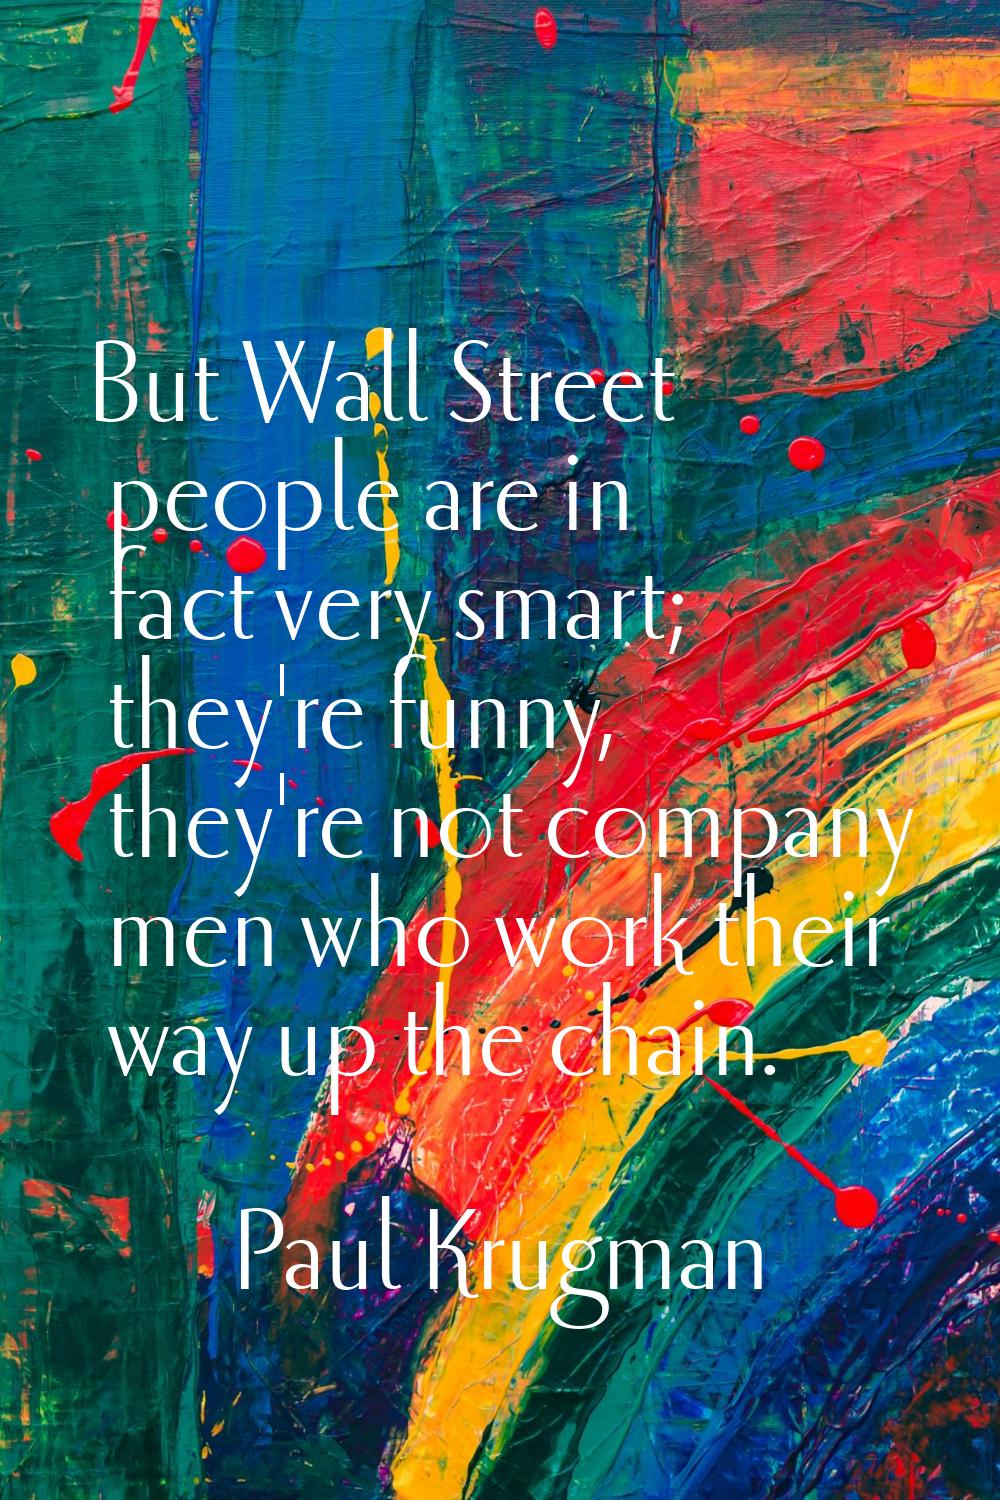 But Wall Street people are in fact very smart; they're funny, they're not company men who work thei